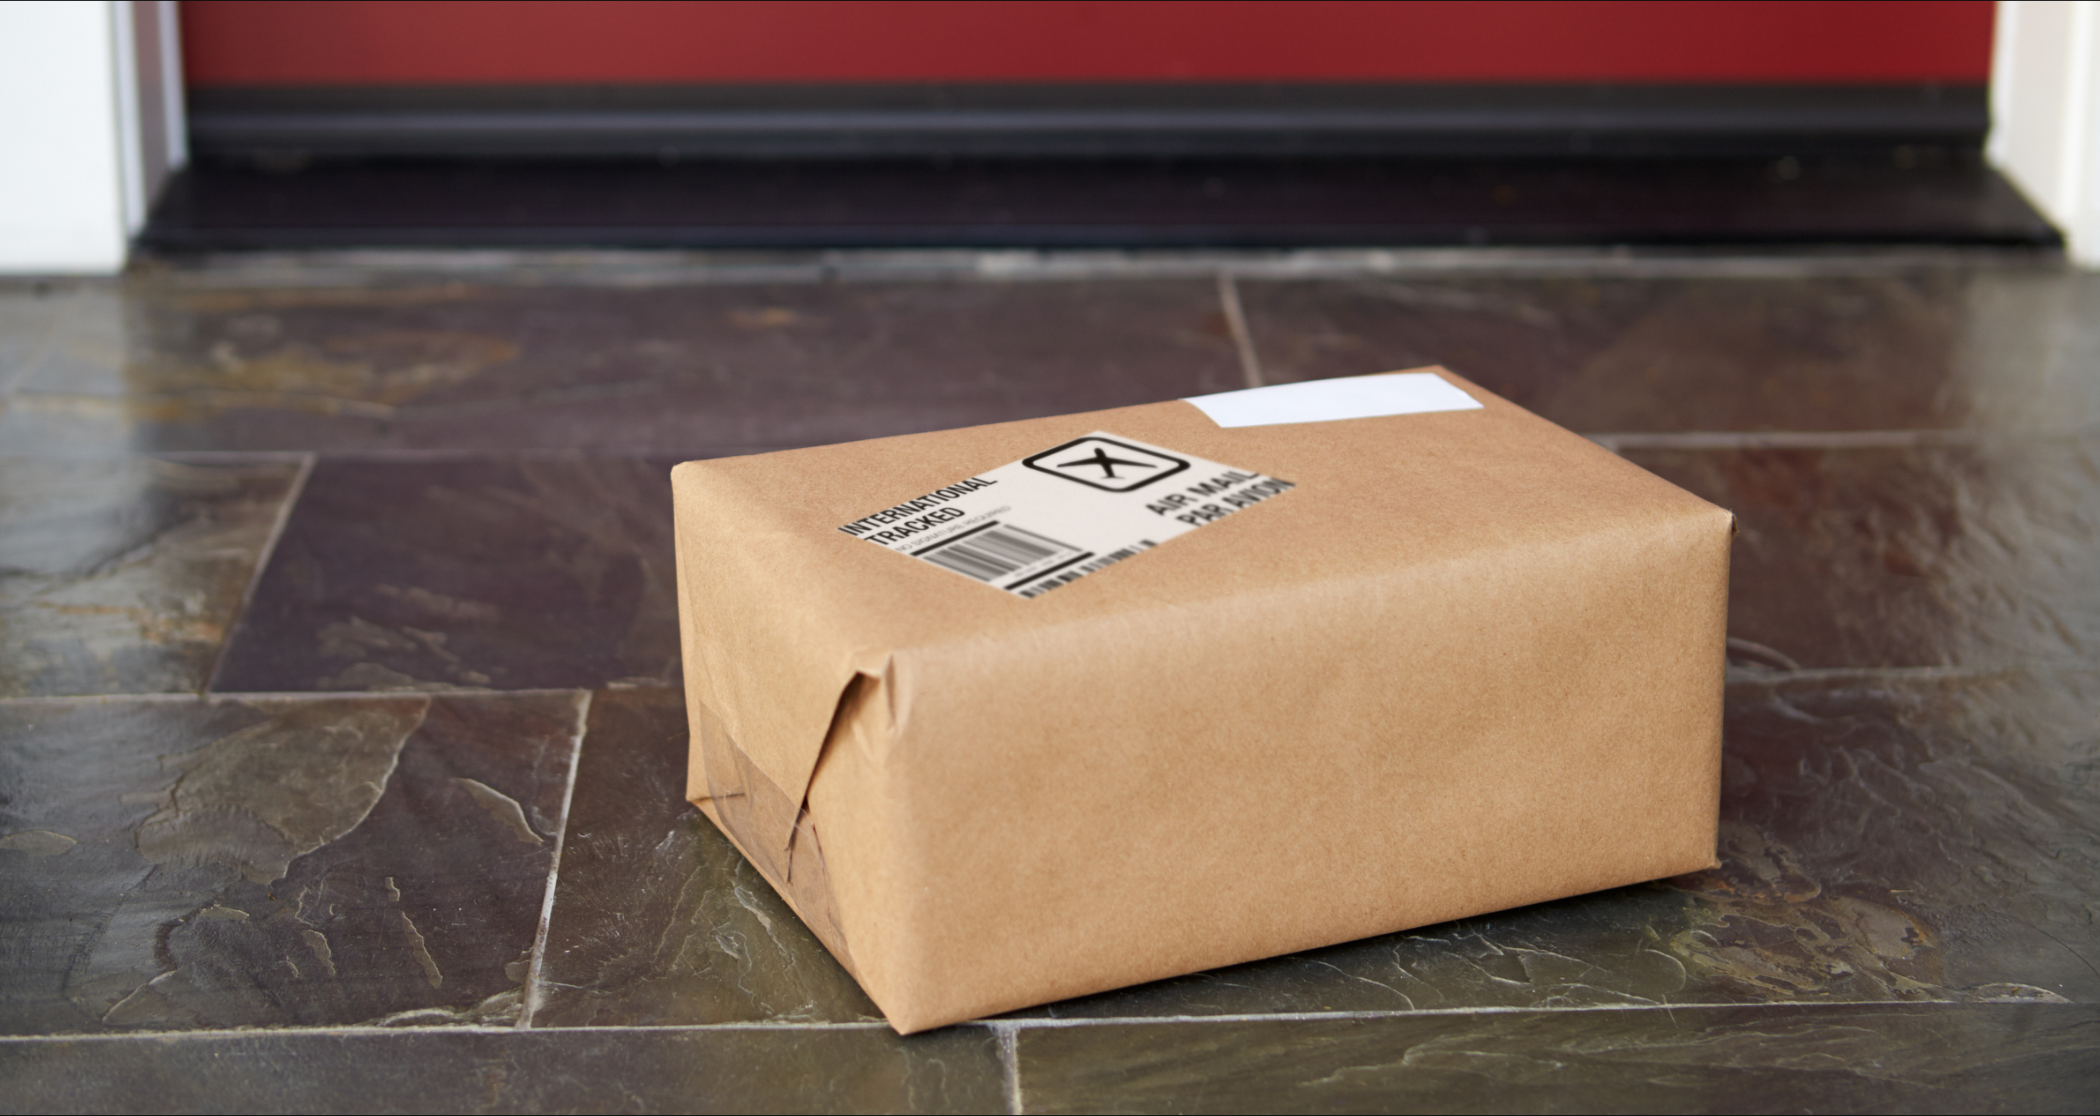 Medium size package wrapped in brown paper sitting on a doorstep